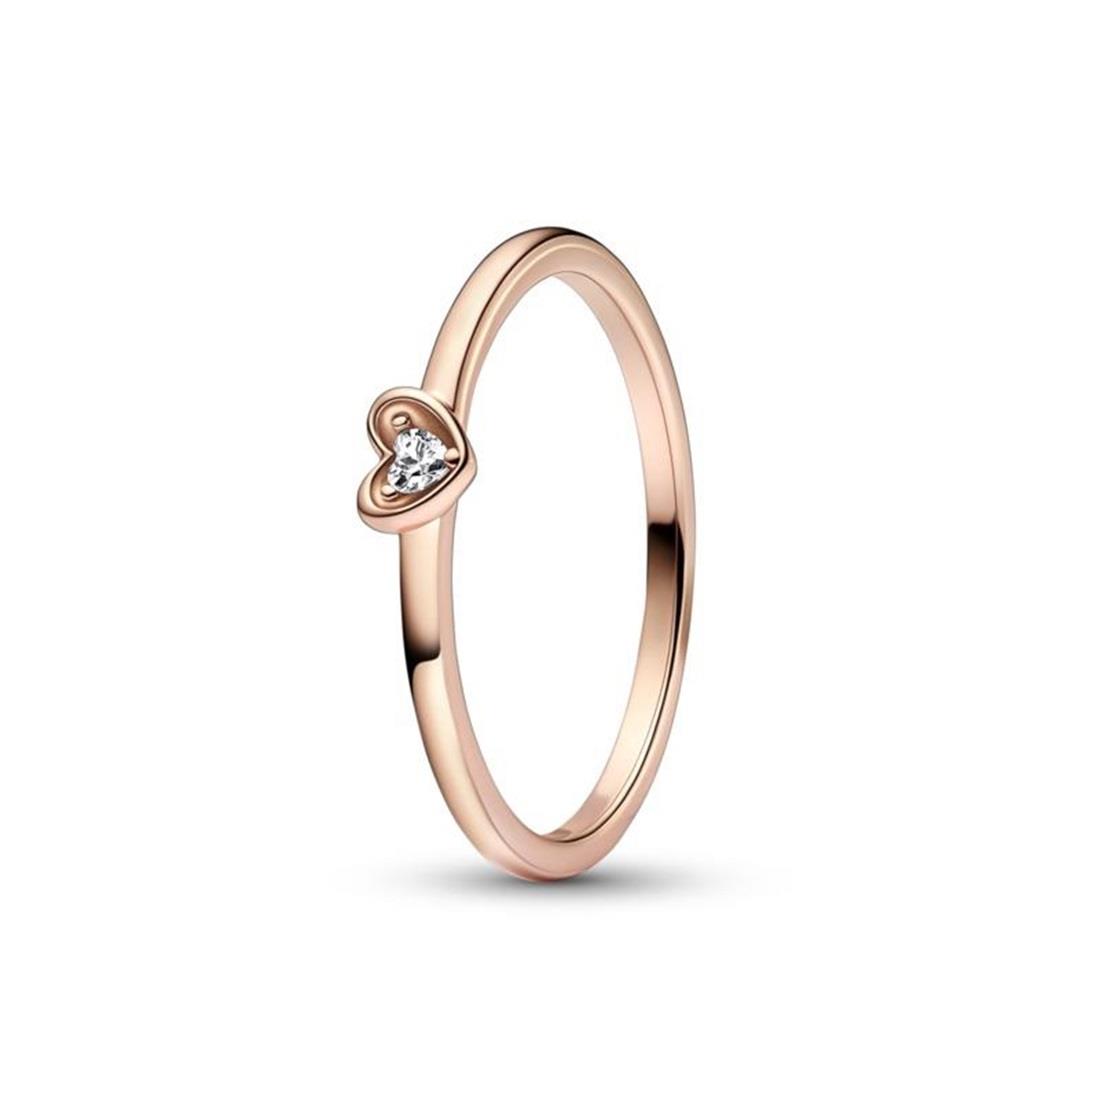 Heart ring in rose gold plated silver with white zircon - PANDORA